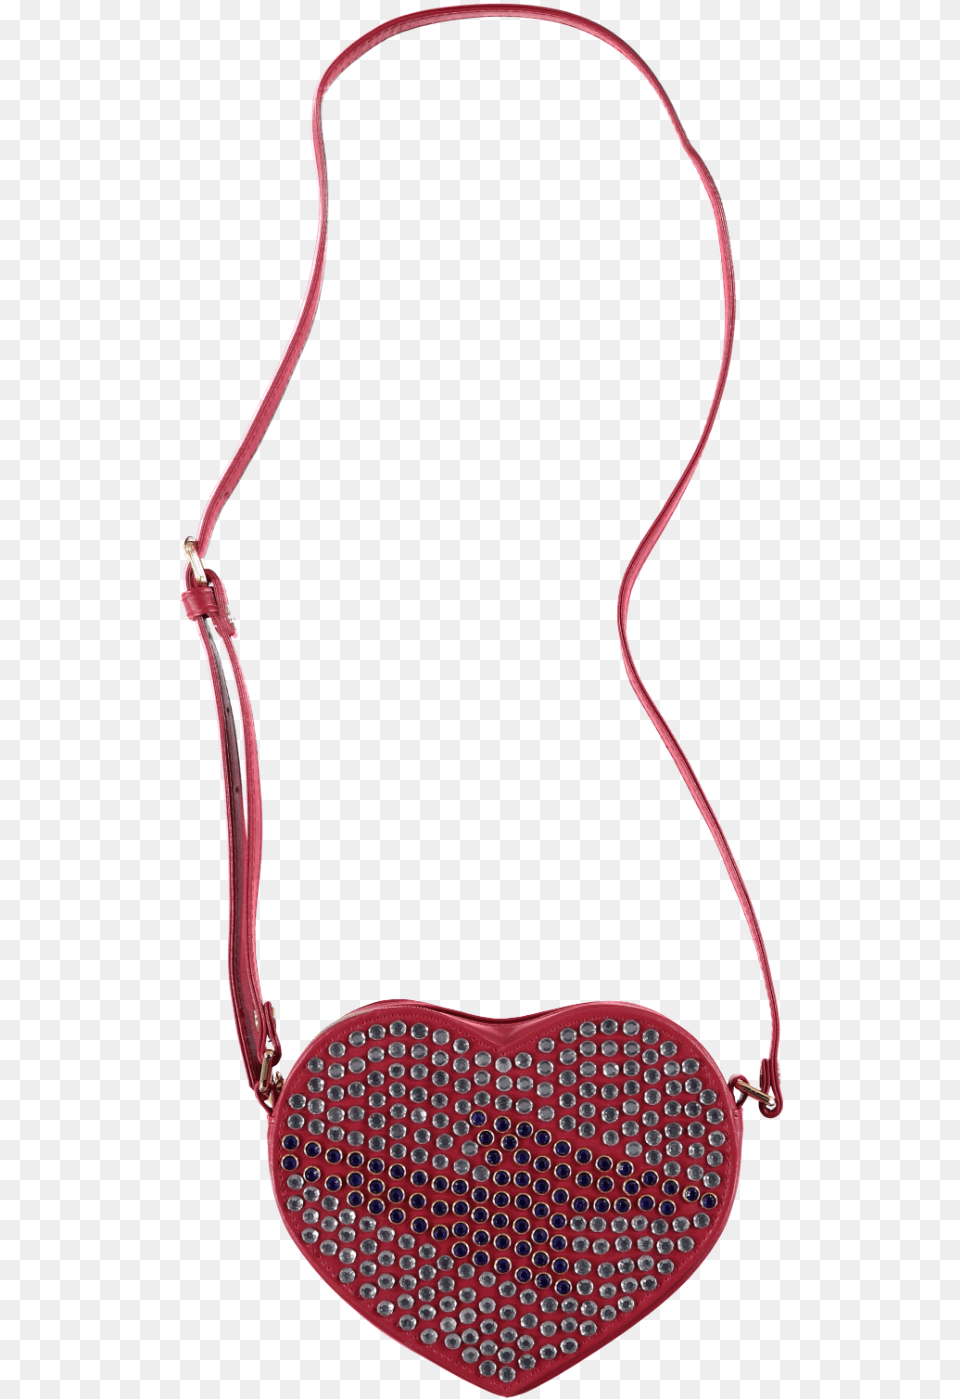 Lightning Bolt Diamante Heart Shaped Handbag Red Full Size Shoulder Bag, Accessories, Jewelry, Necklace, Purse Png